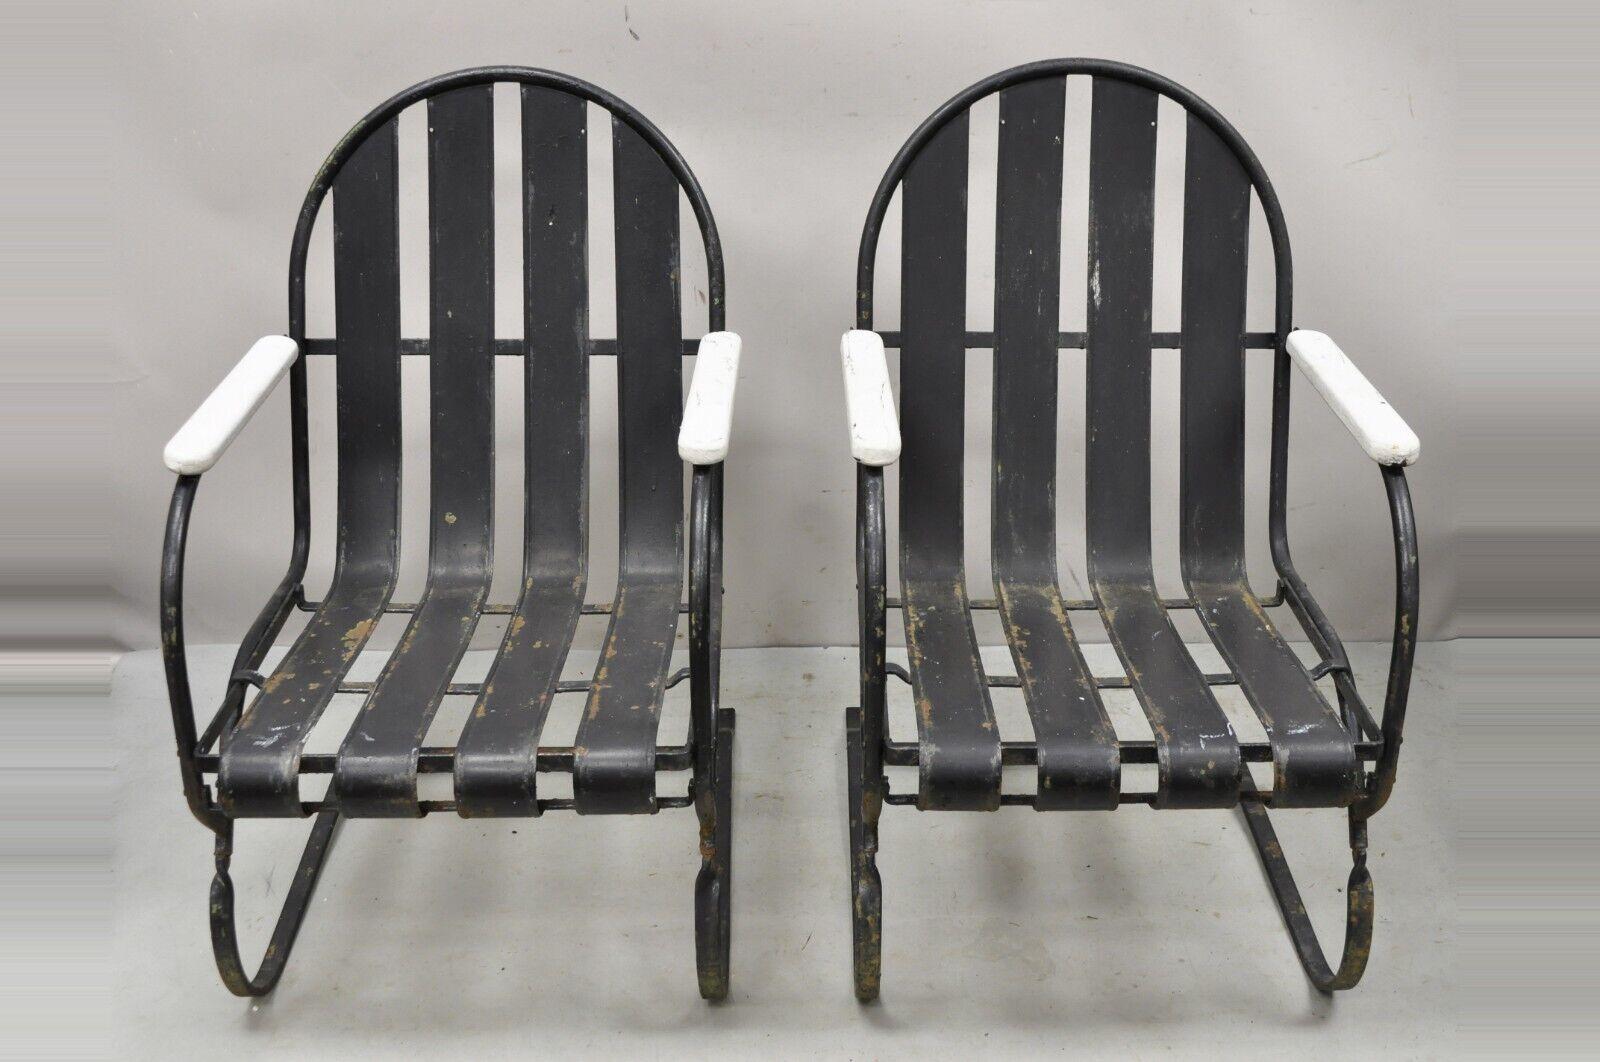 Pair Vintage Art Deco Black and White Steel Metal Slat Patio Bouncer chairs. Item features white painted wooden armrests, black painted metal bouncer frames, very nice vintage pair, great style and form. Circa Early to Mid 20th Century.